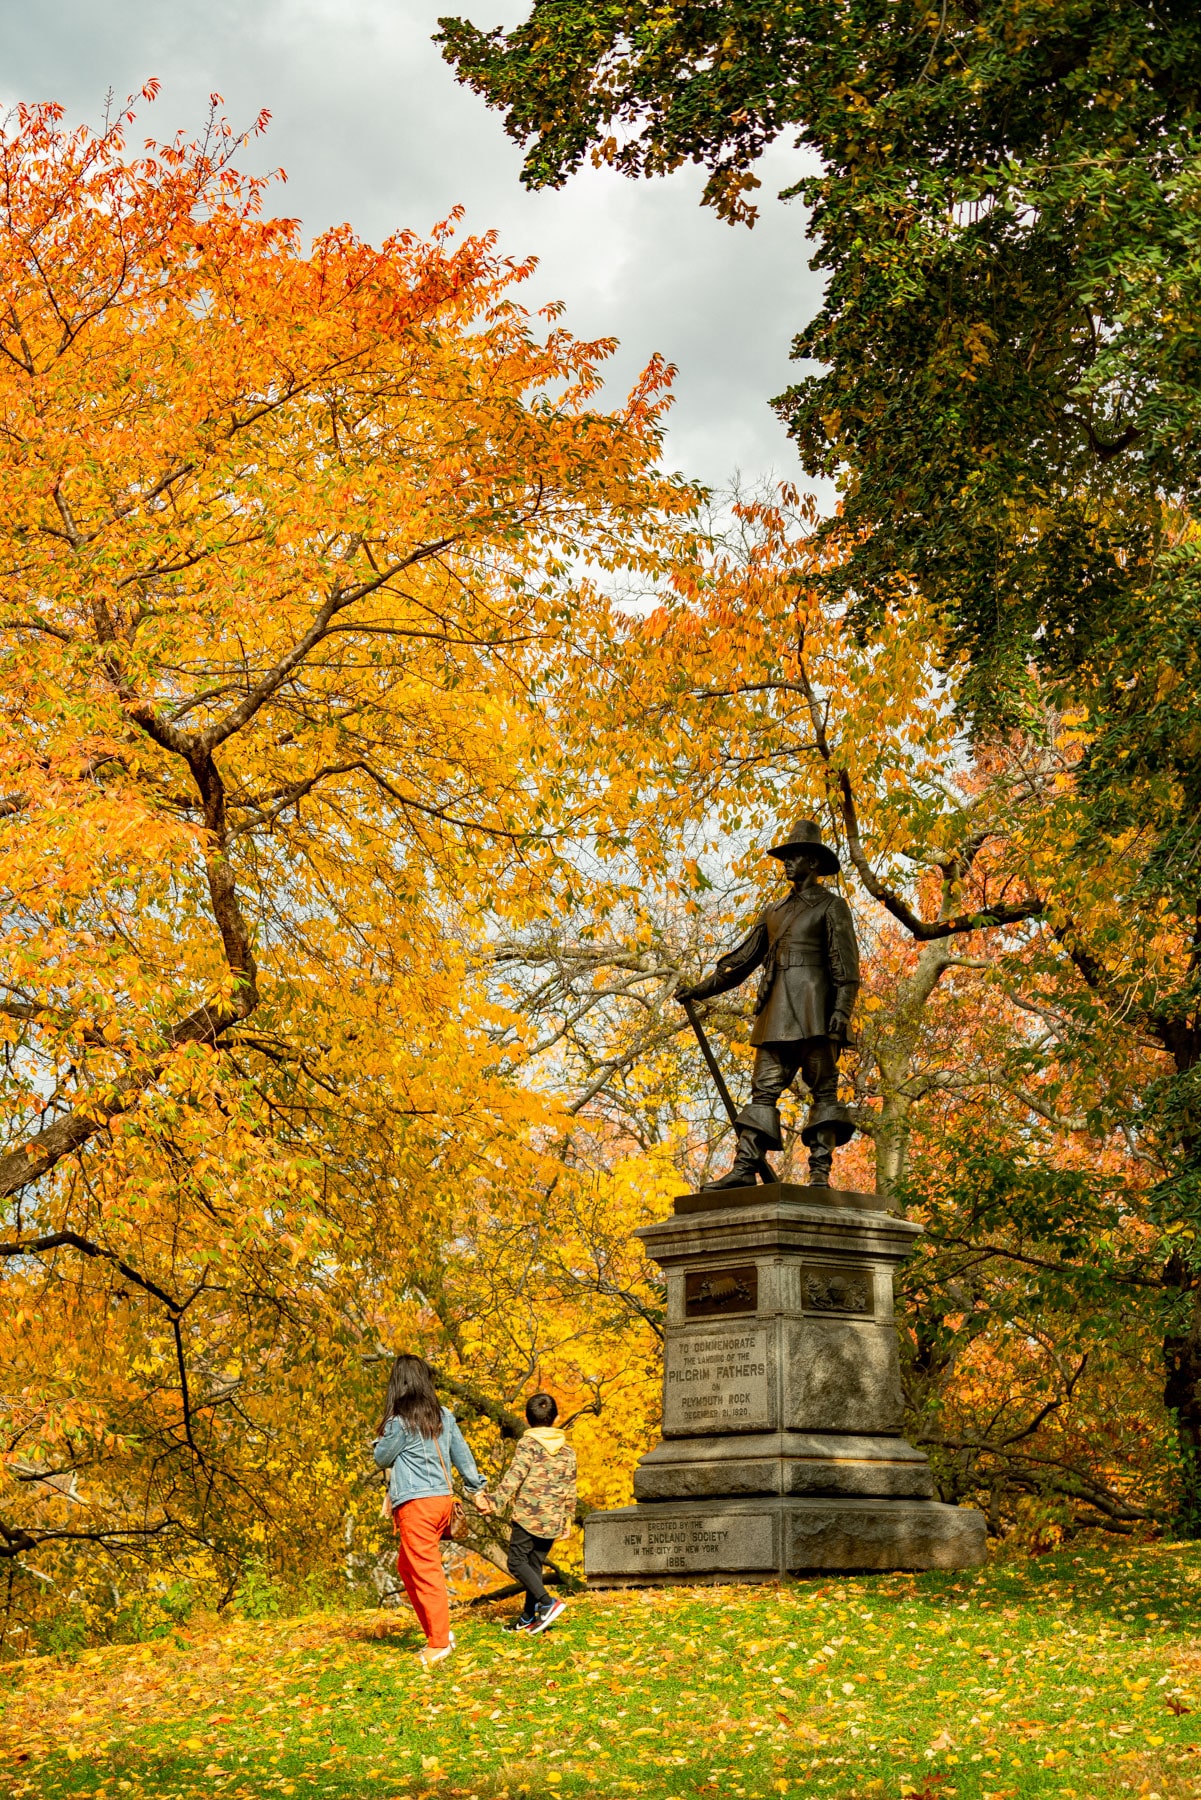 Central Park in Autumn 
Fall Foliage NYC